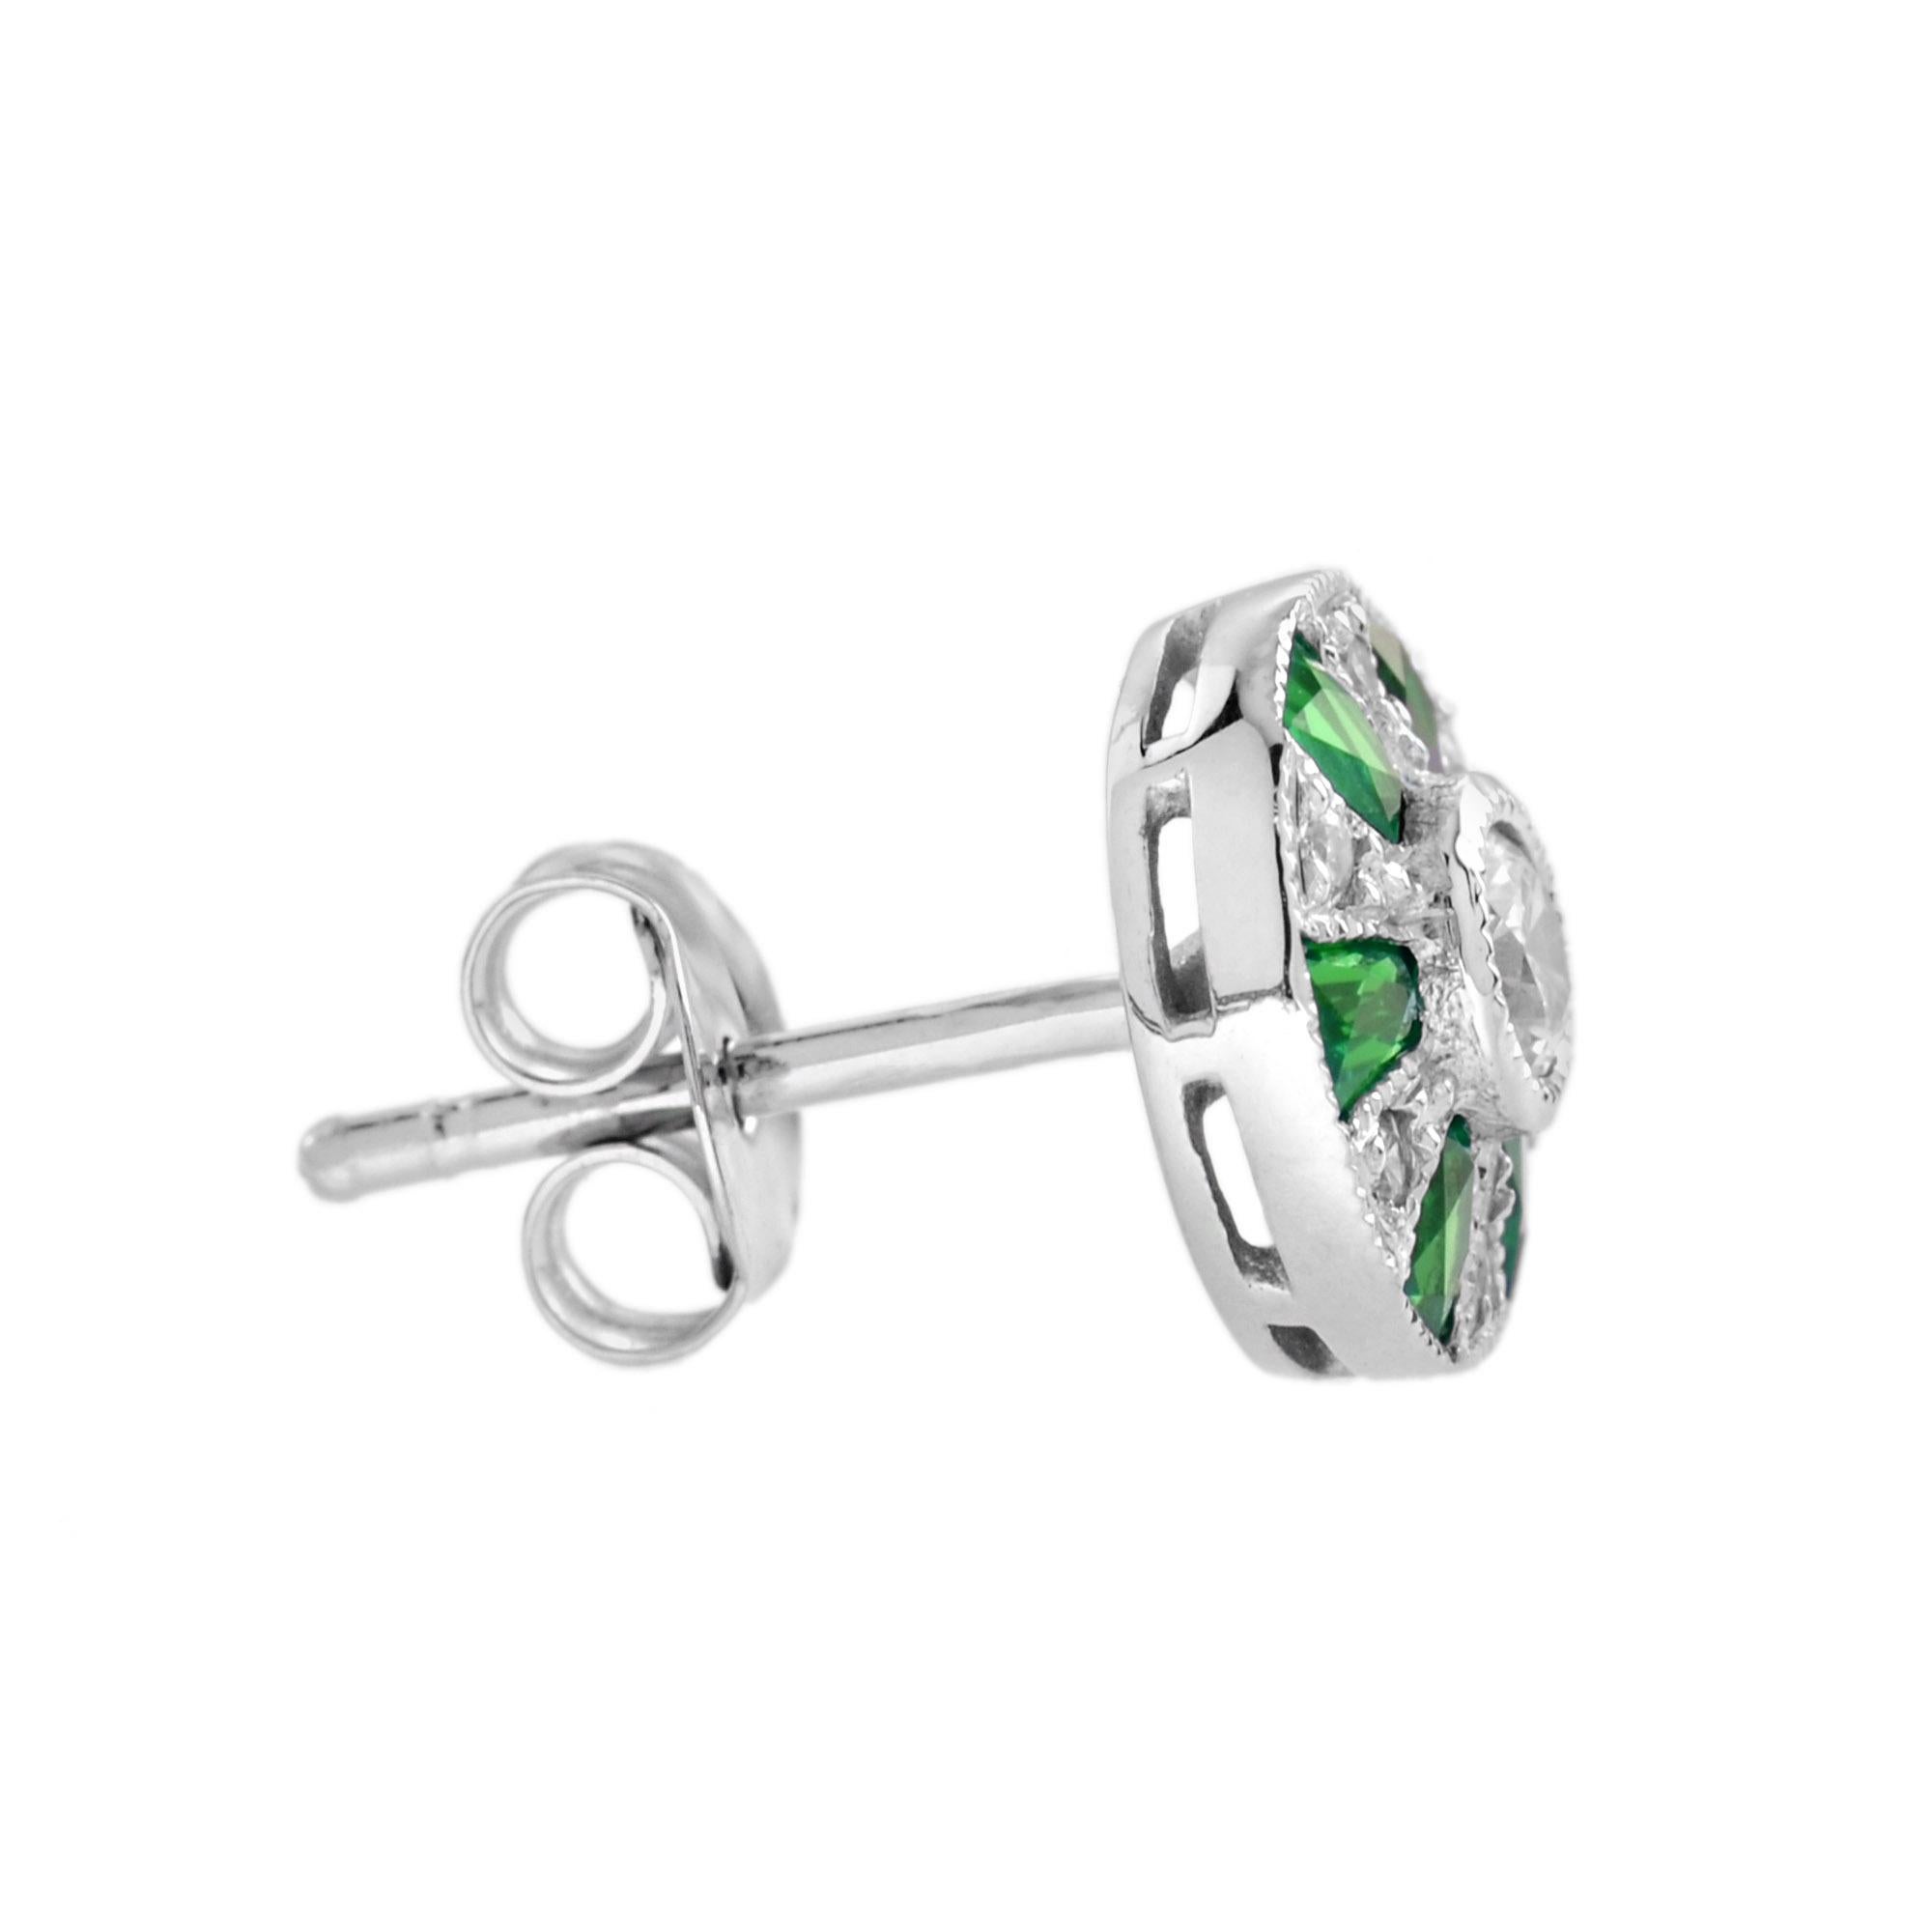 Round Cut Ferris Wheel Diamond and French Cut Emerald Art Deco Style Earrings in 14K Gold For Sale